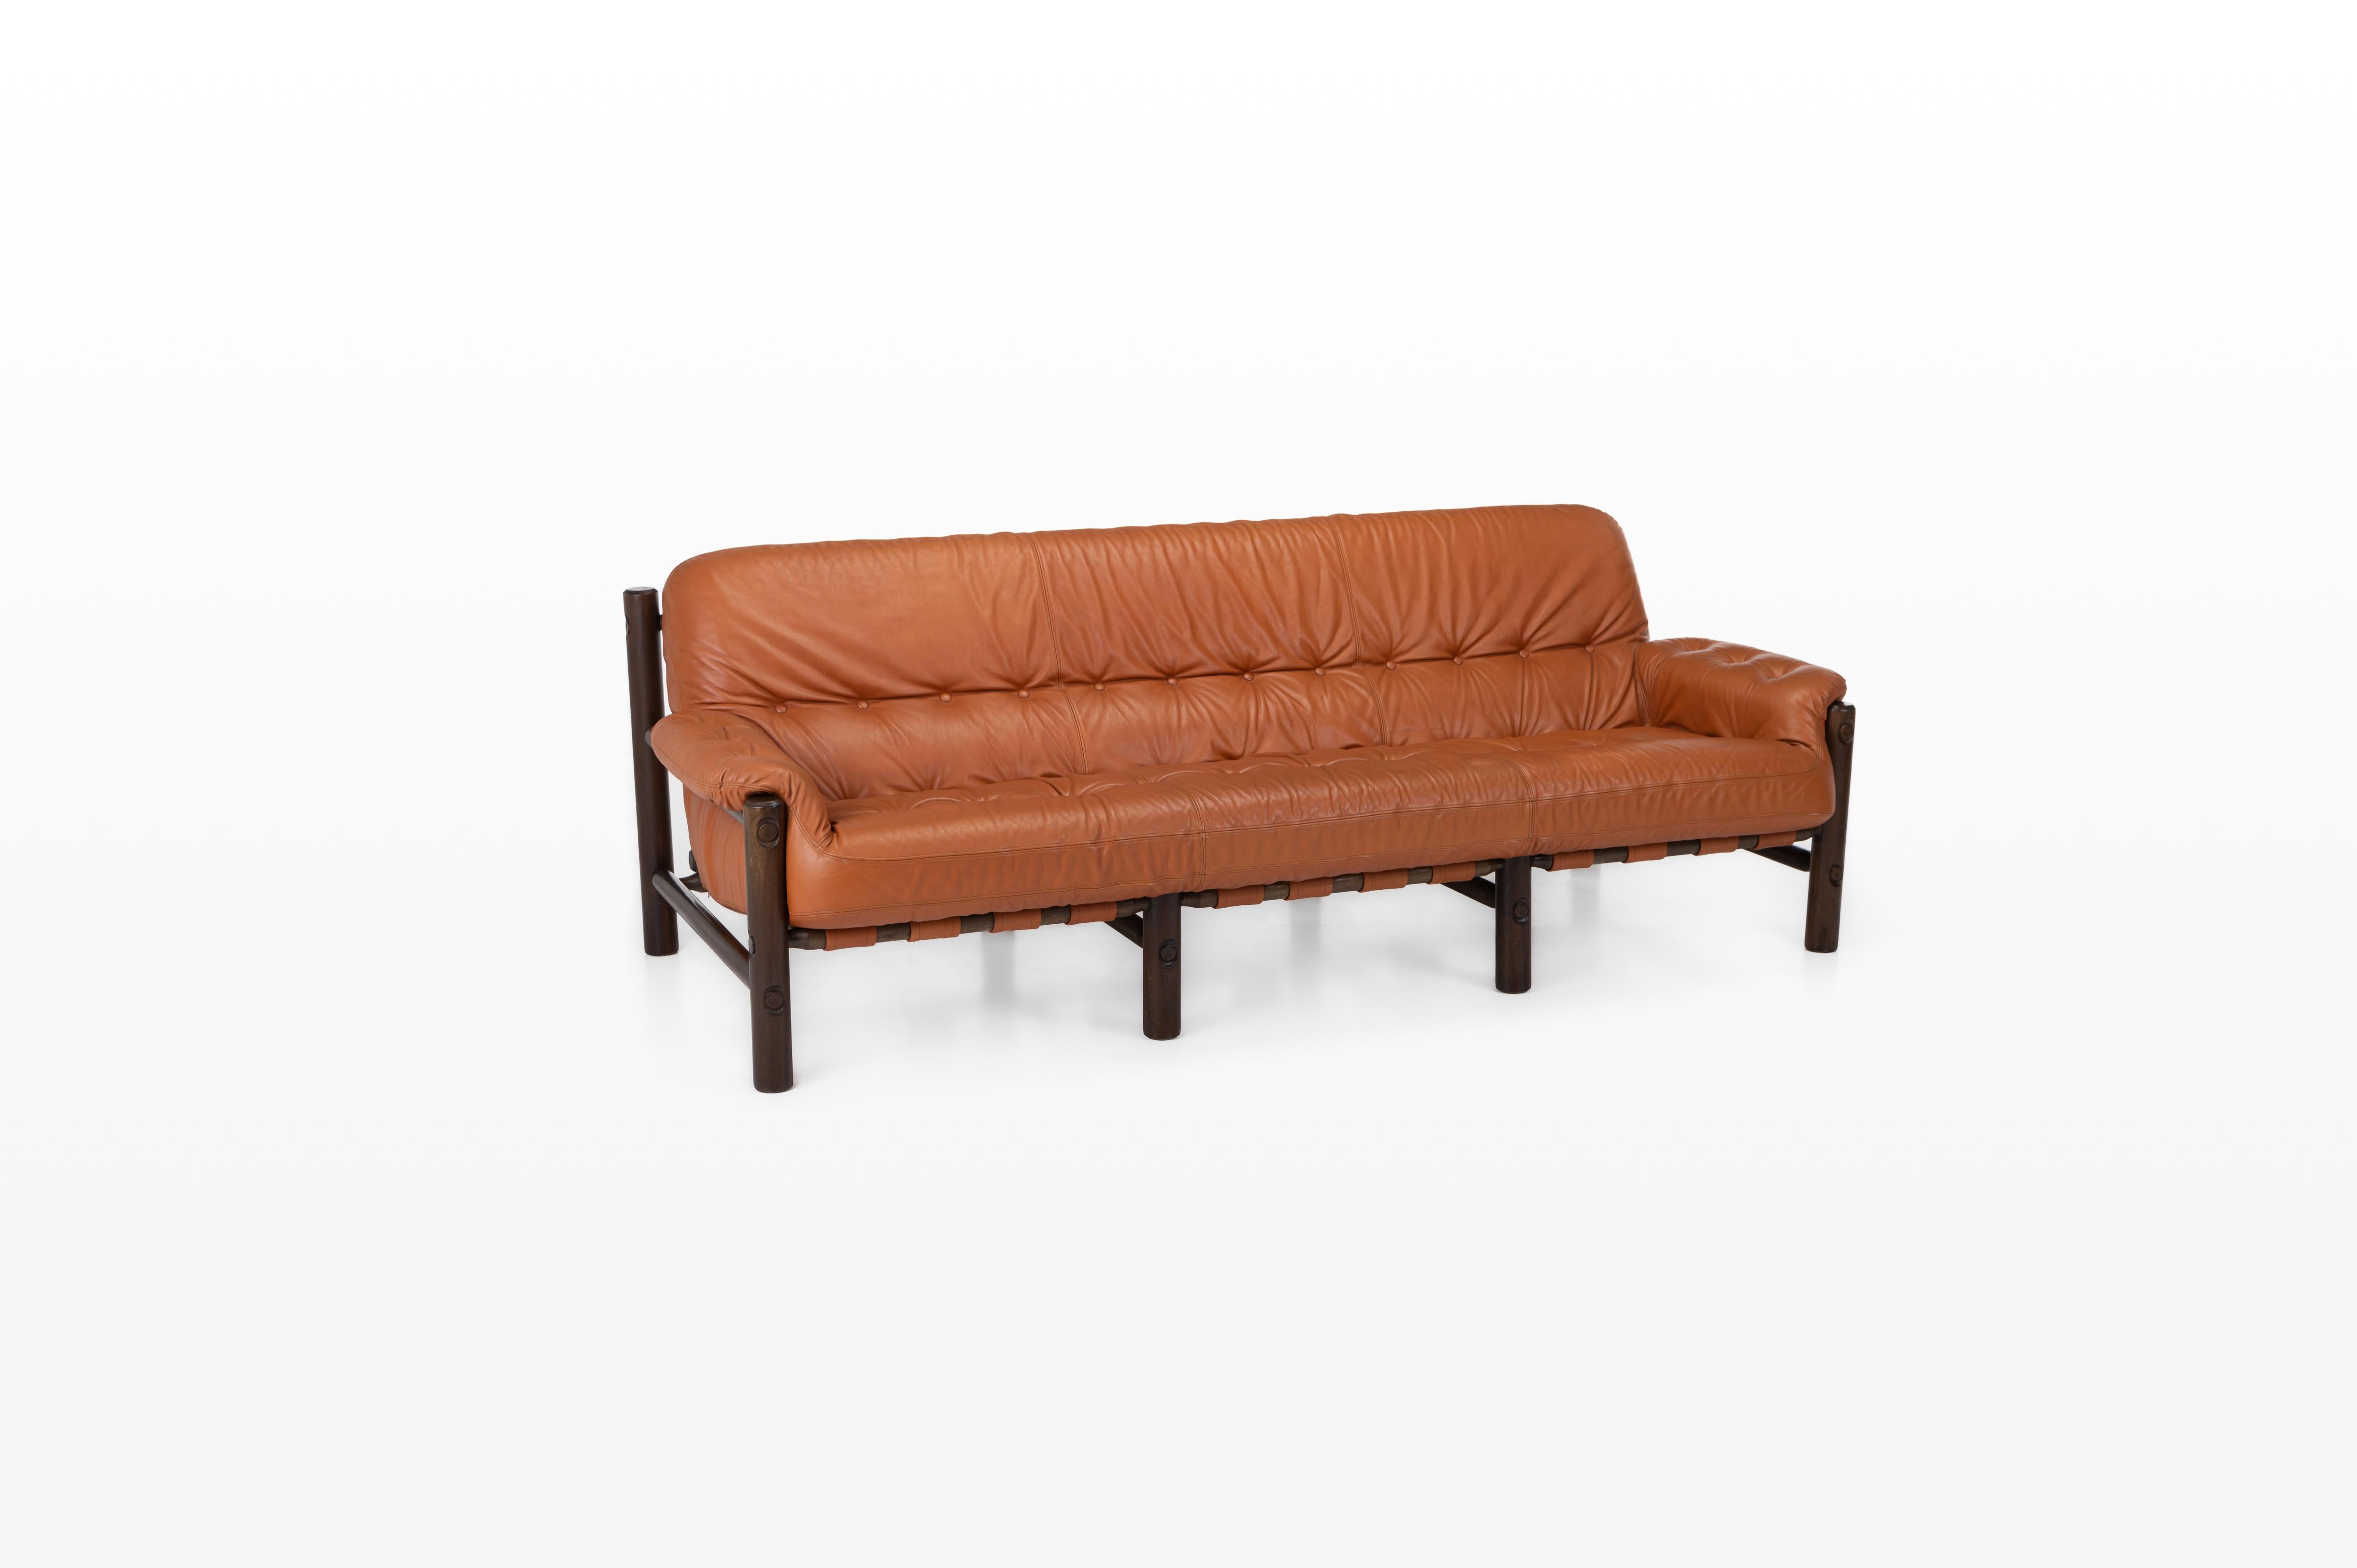 Brutalist Vintage Brazilian Three-Seater Sofa in Cognac Brown Leather by Jean Gillon